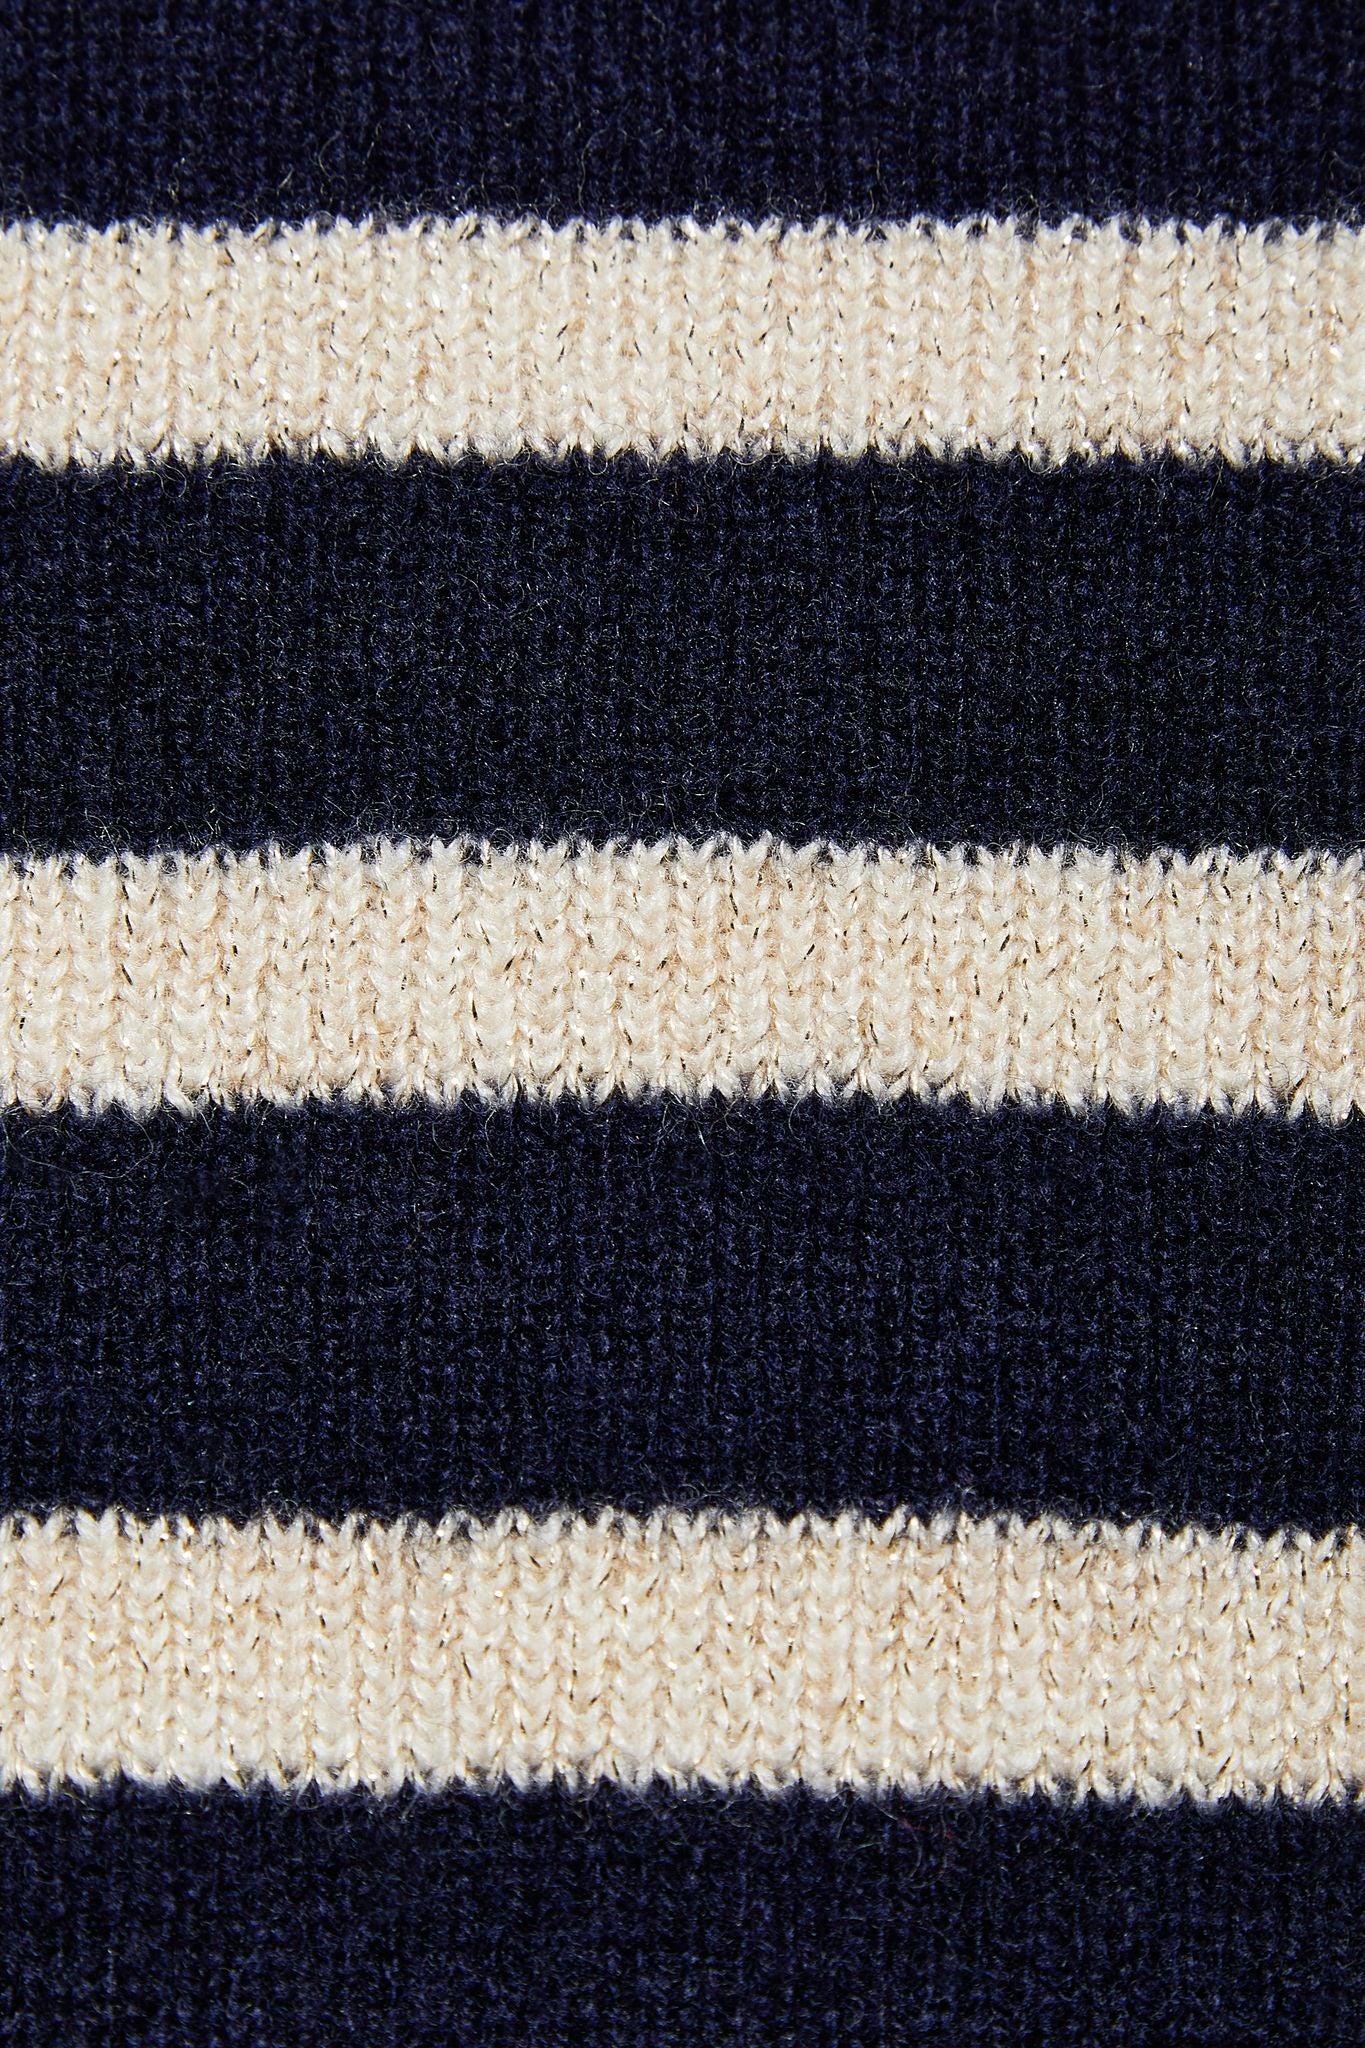 Breton stripe jumper in navy and cream wool and cashmere blend. Flattering waist detail and puff sleeves.